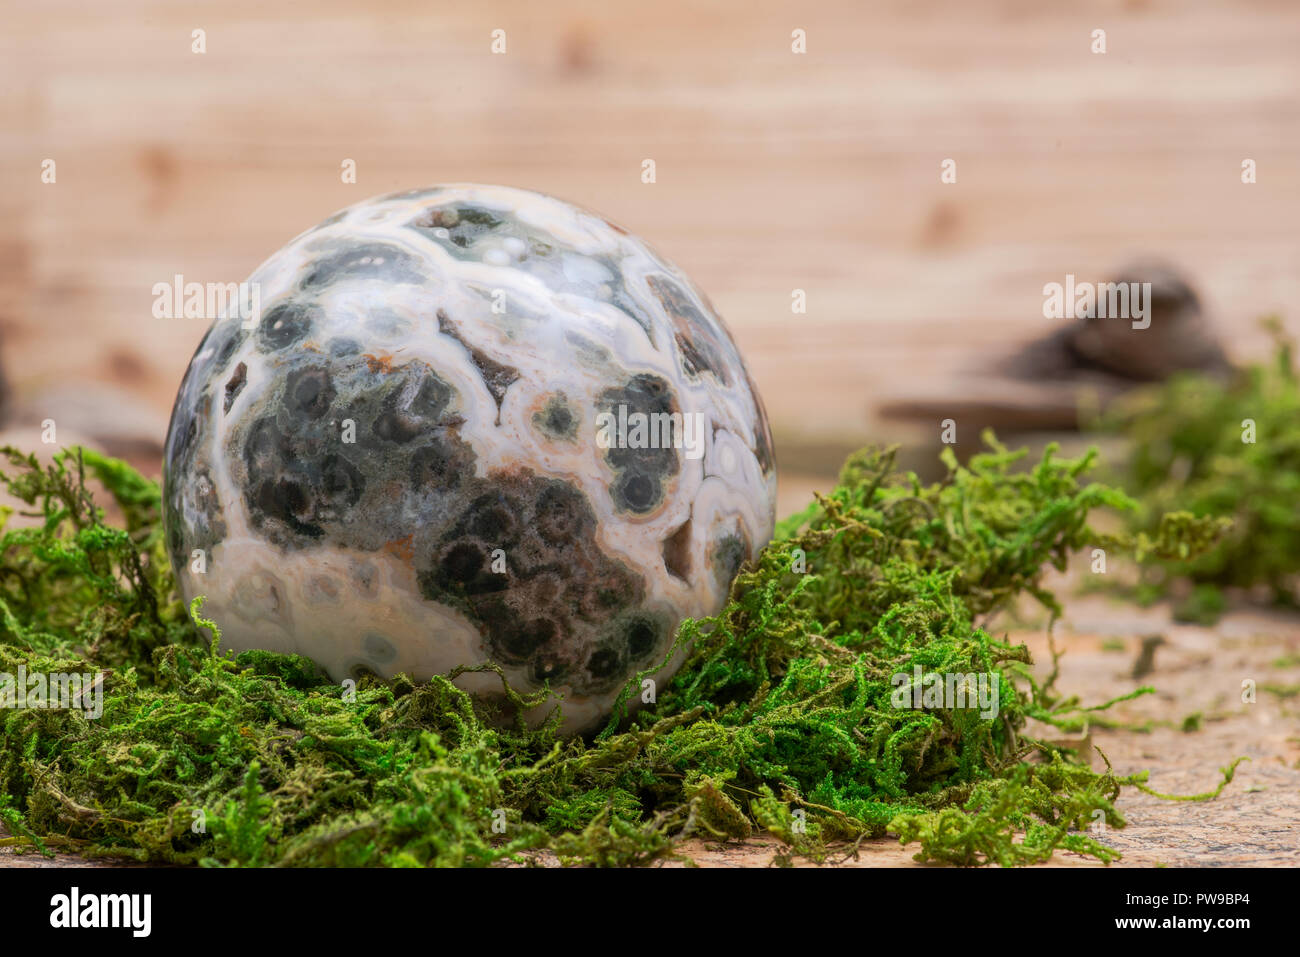 Orbicular ocean jasper sphere with crystallized vugs from Madagascar on moss, bryophyta and cork background Stock Photo